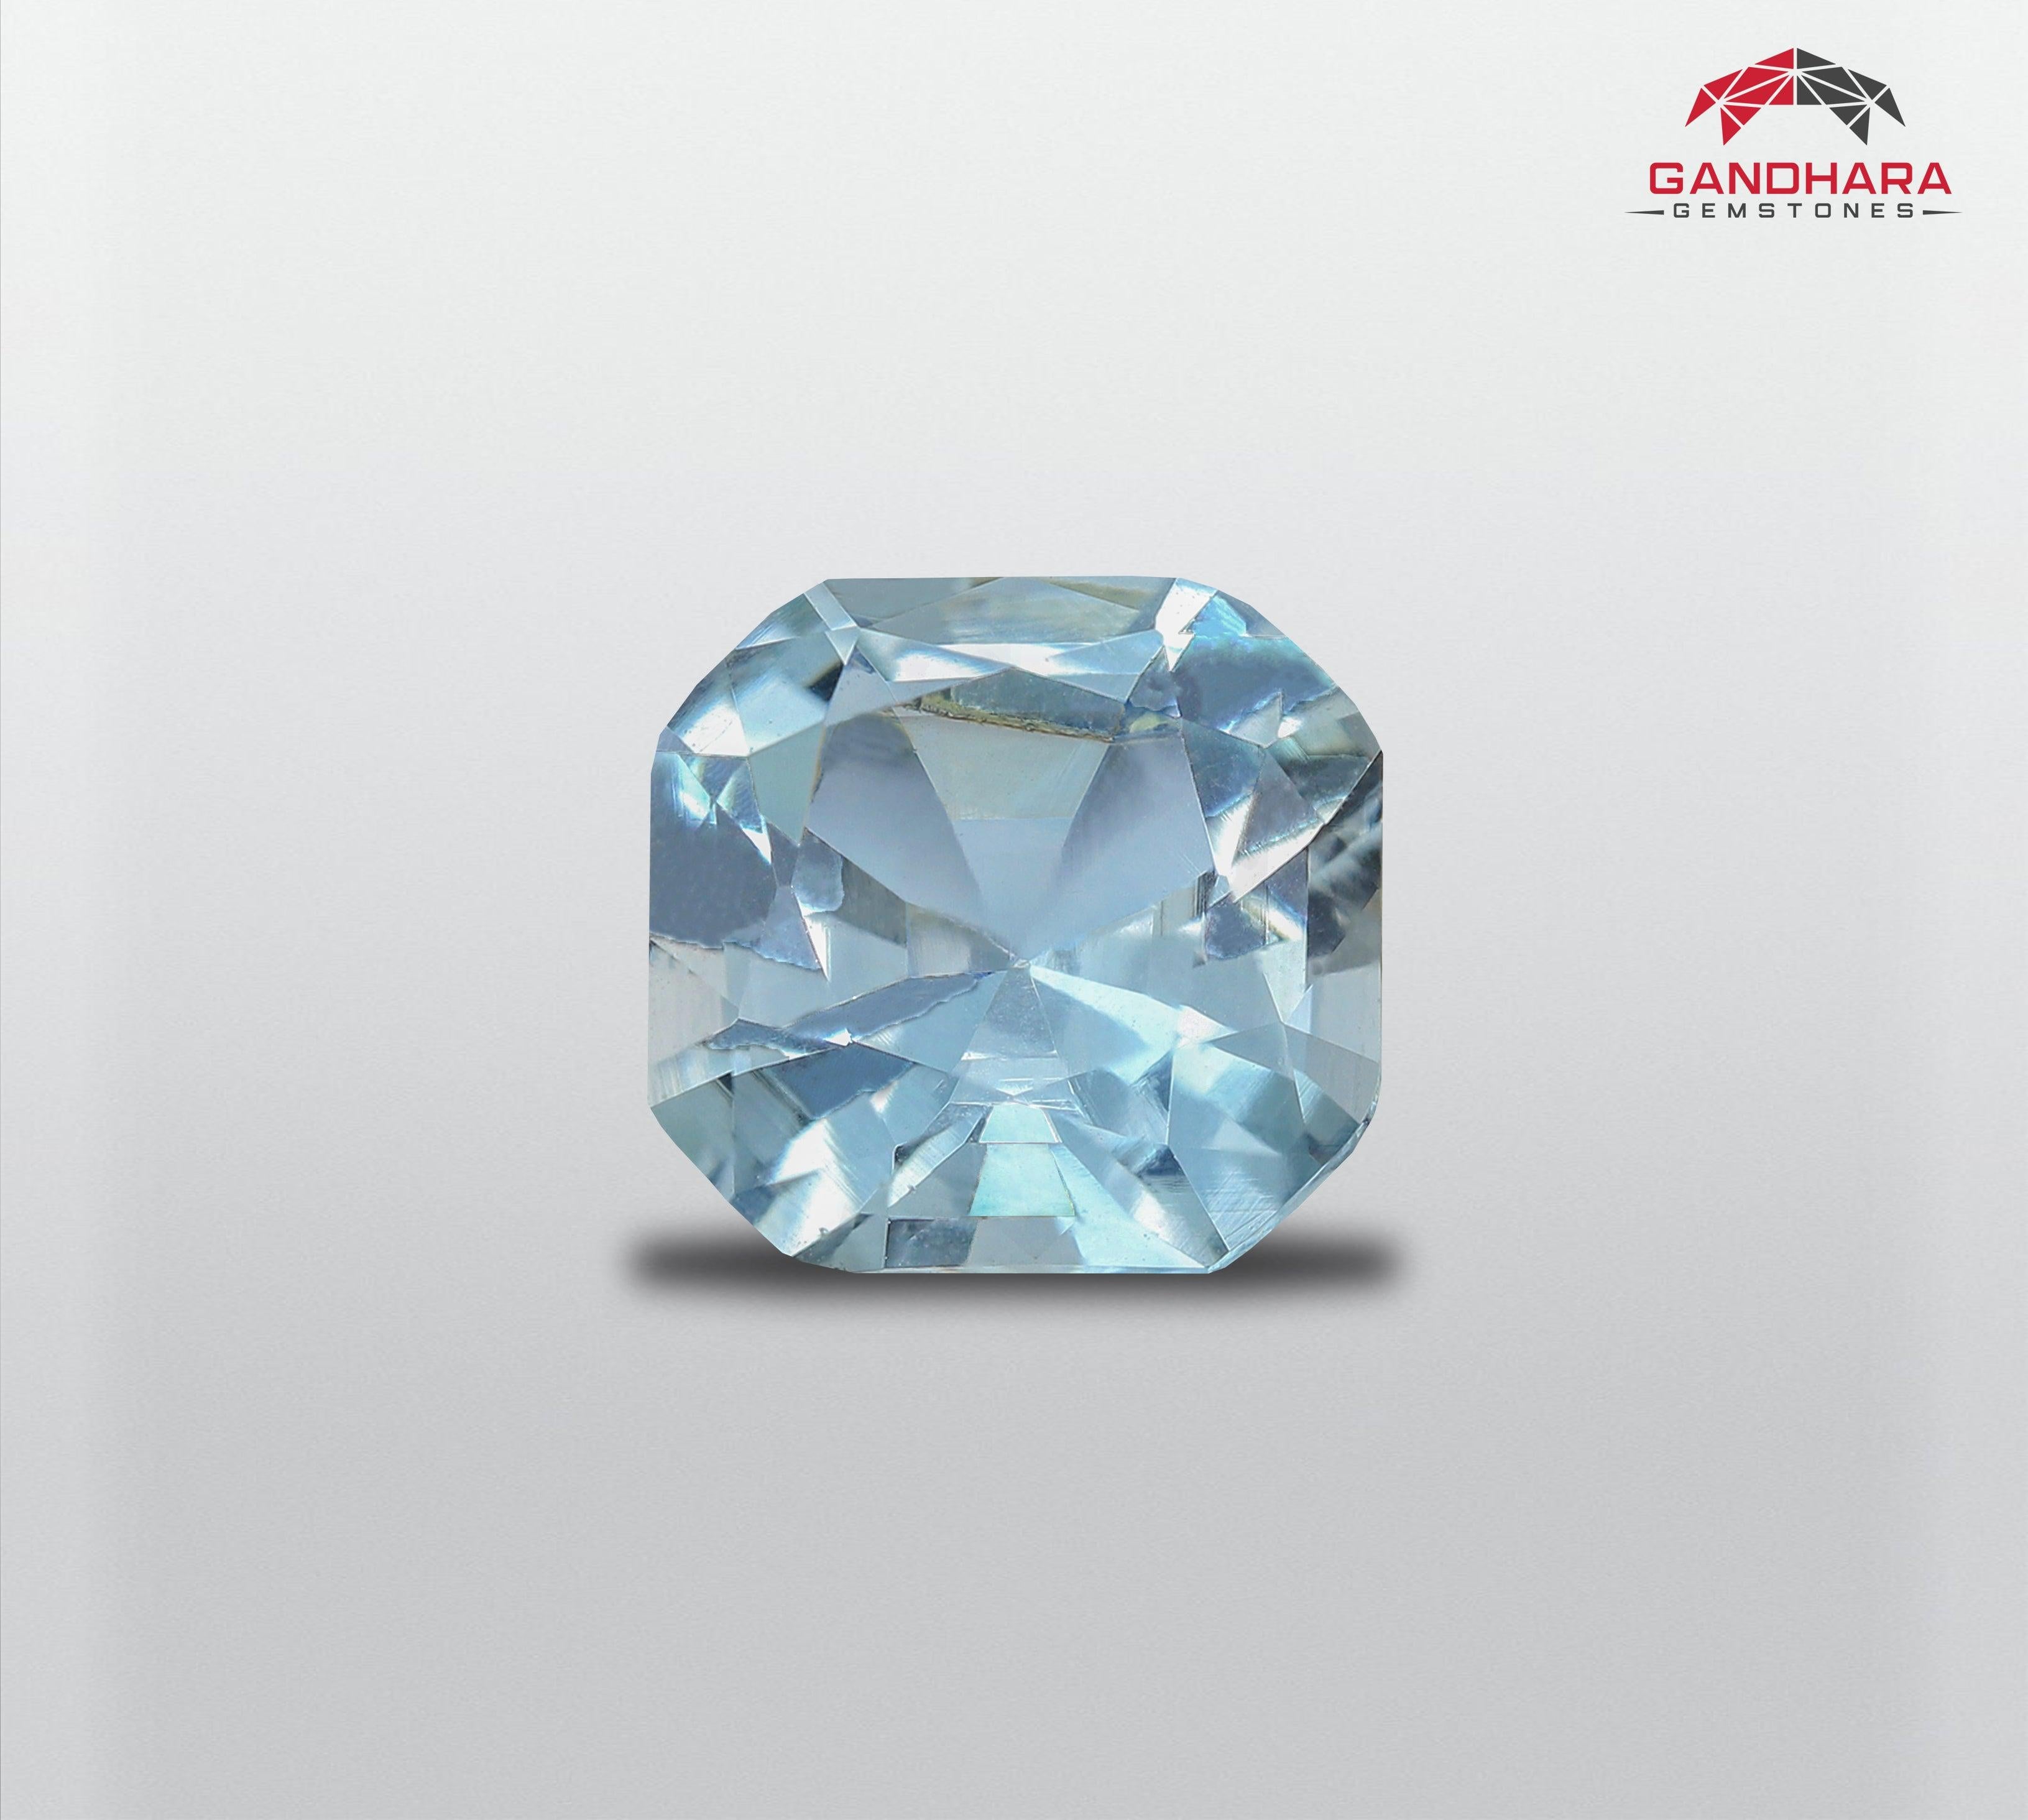 Natural Sea Blue Aquamarine Stone, available for sale at wholesale price natural high quality, SI clarity, 1.52 carats certified aquamarine From Pakistan.

Product Information:
GEMSTONE NAME	Natural Sea Blue Aquamarine Stone
WEIGHT	1.52